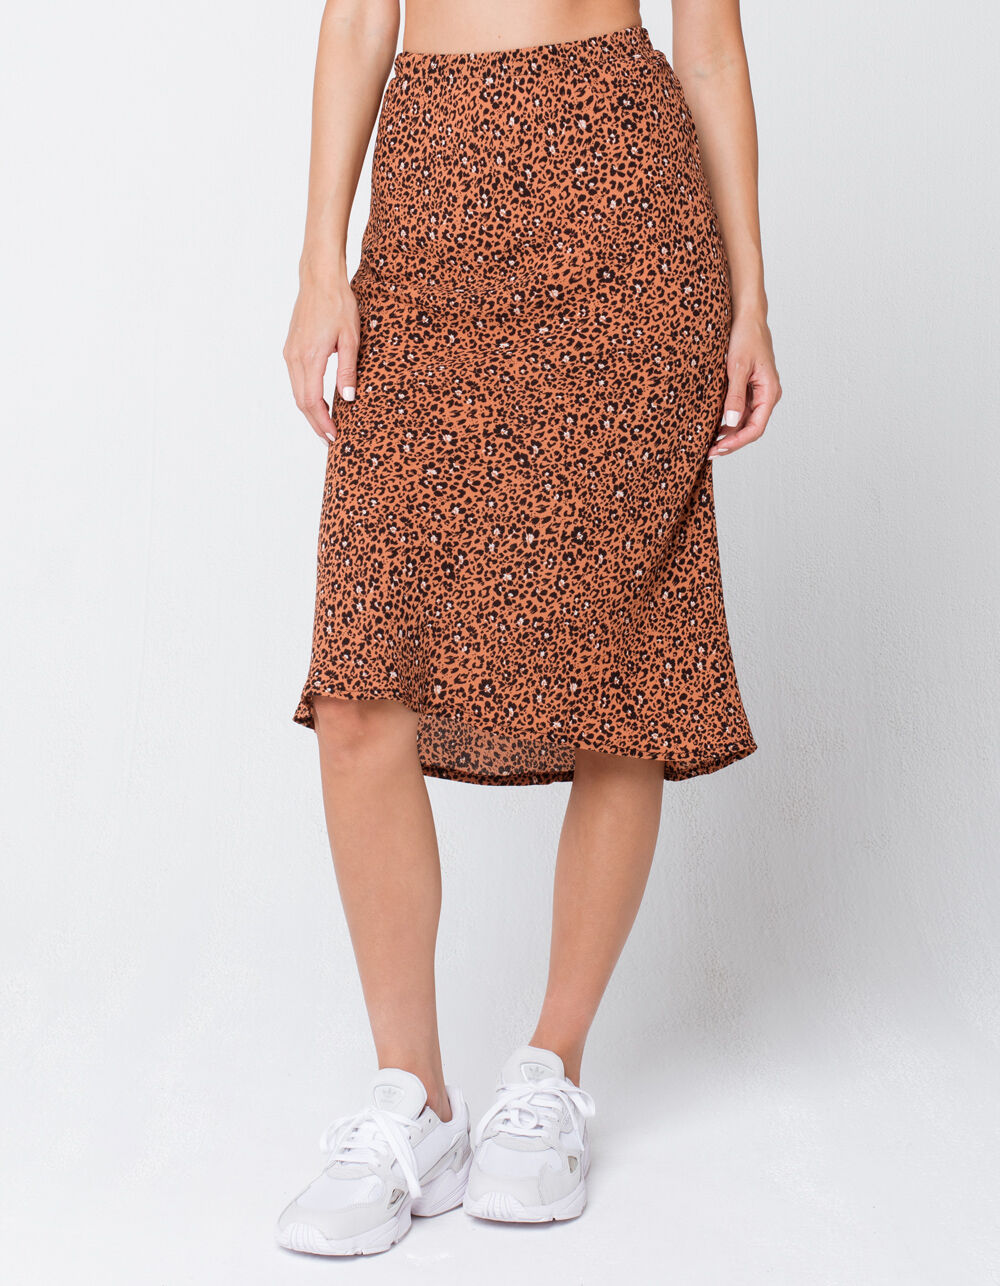 SKY AND SPARROW Leopard Midi Skirt image number 2